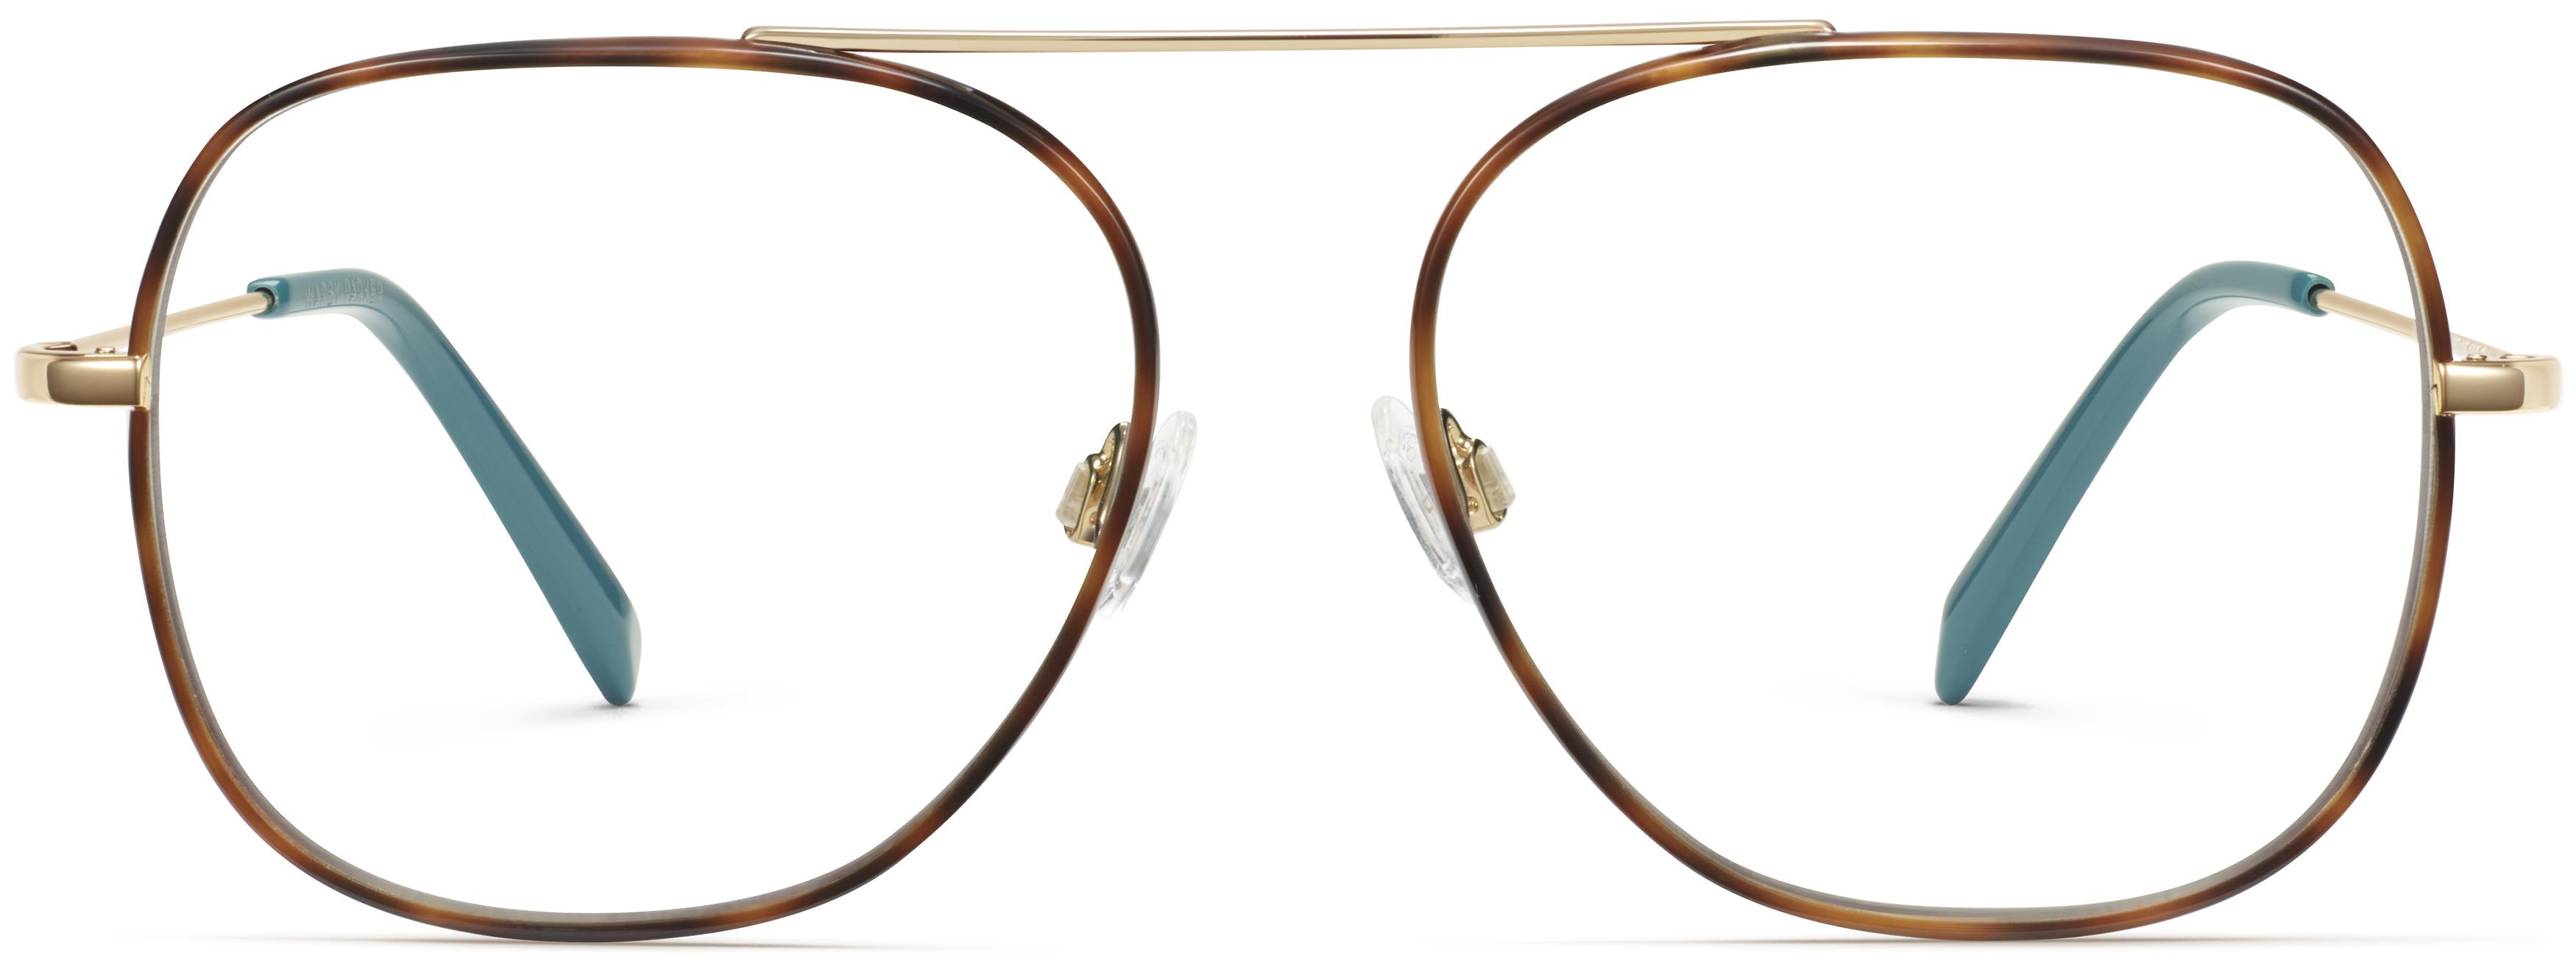 WARBY PARKER 度無しメガネ-connectedremag.com